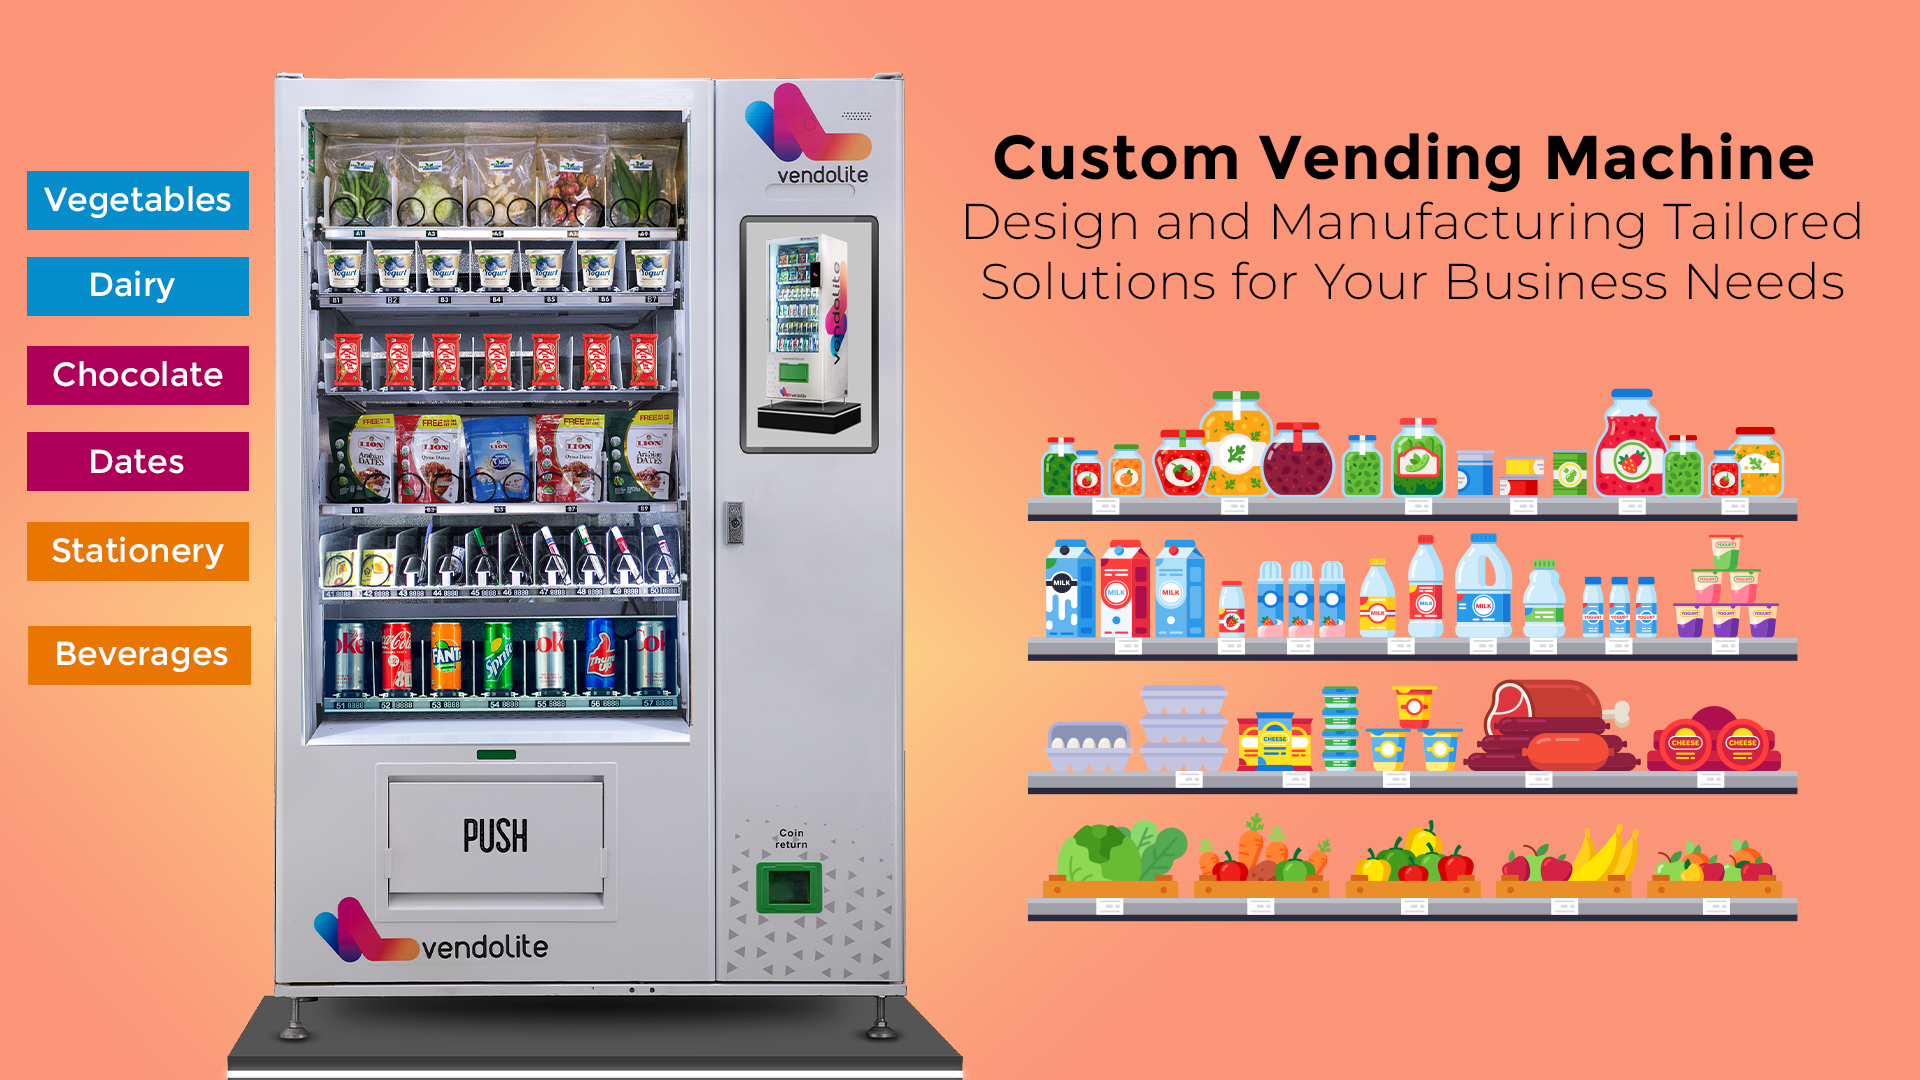 Custom Vending Machine Design and Manufacturing: Tailored Solutions for Your Business Needs